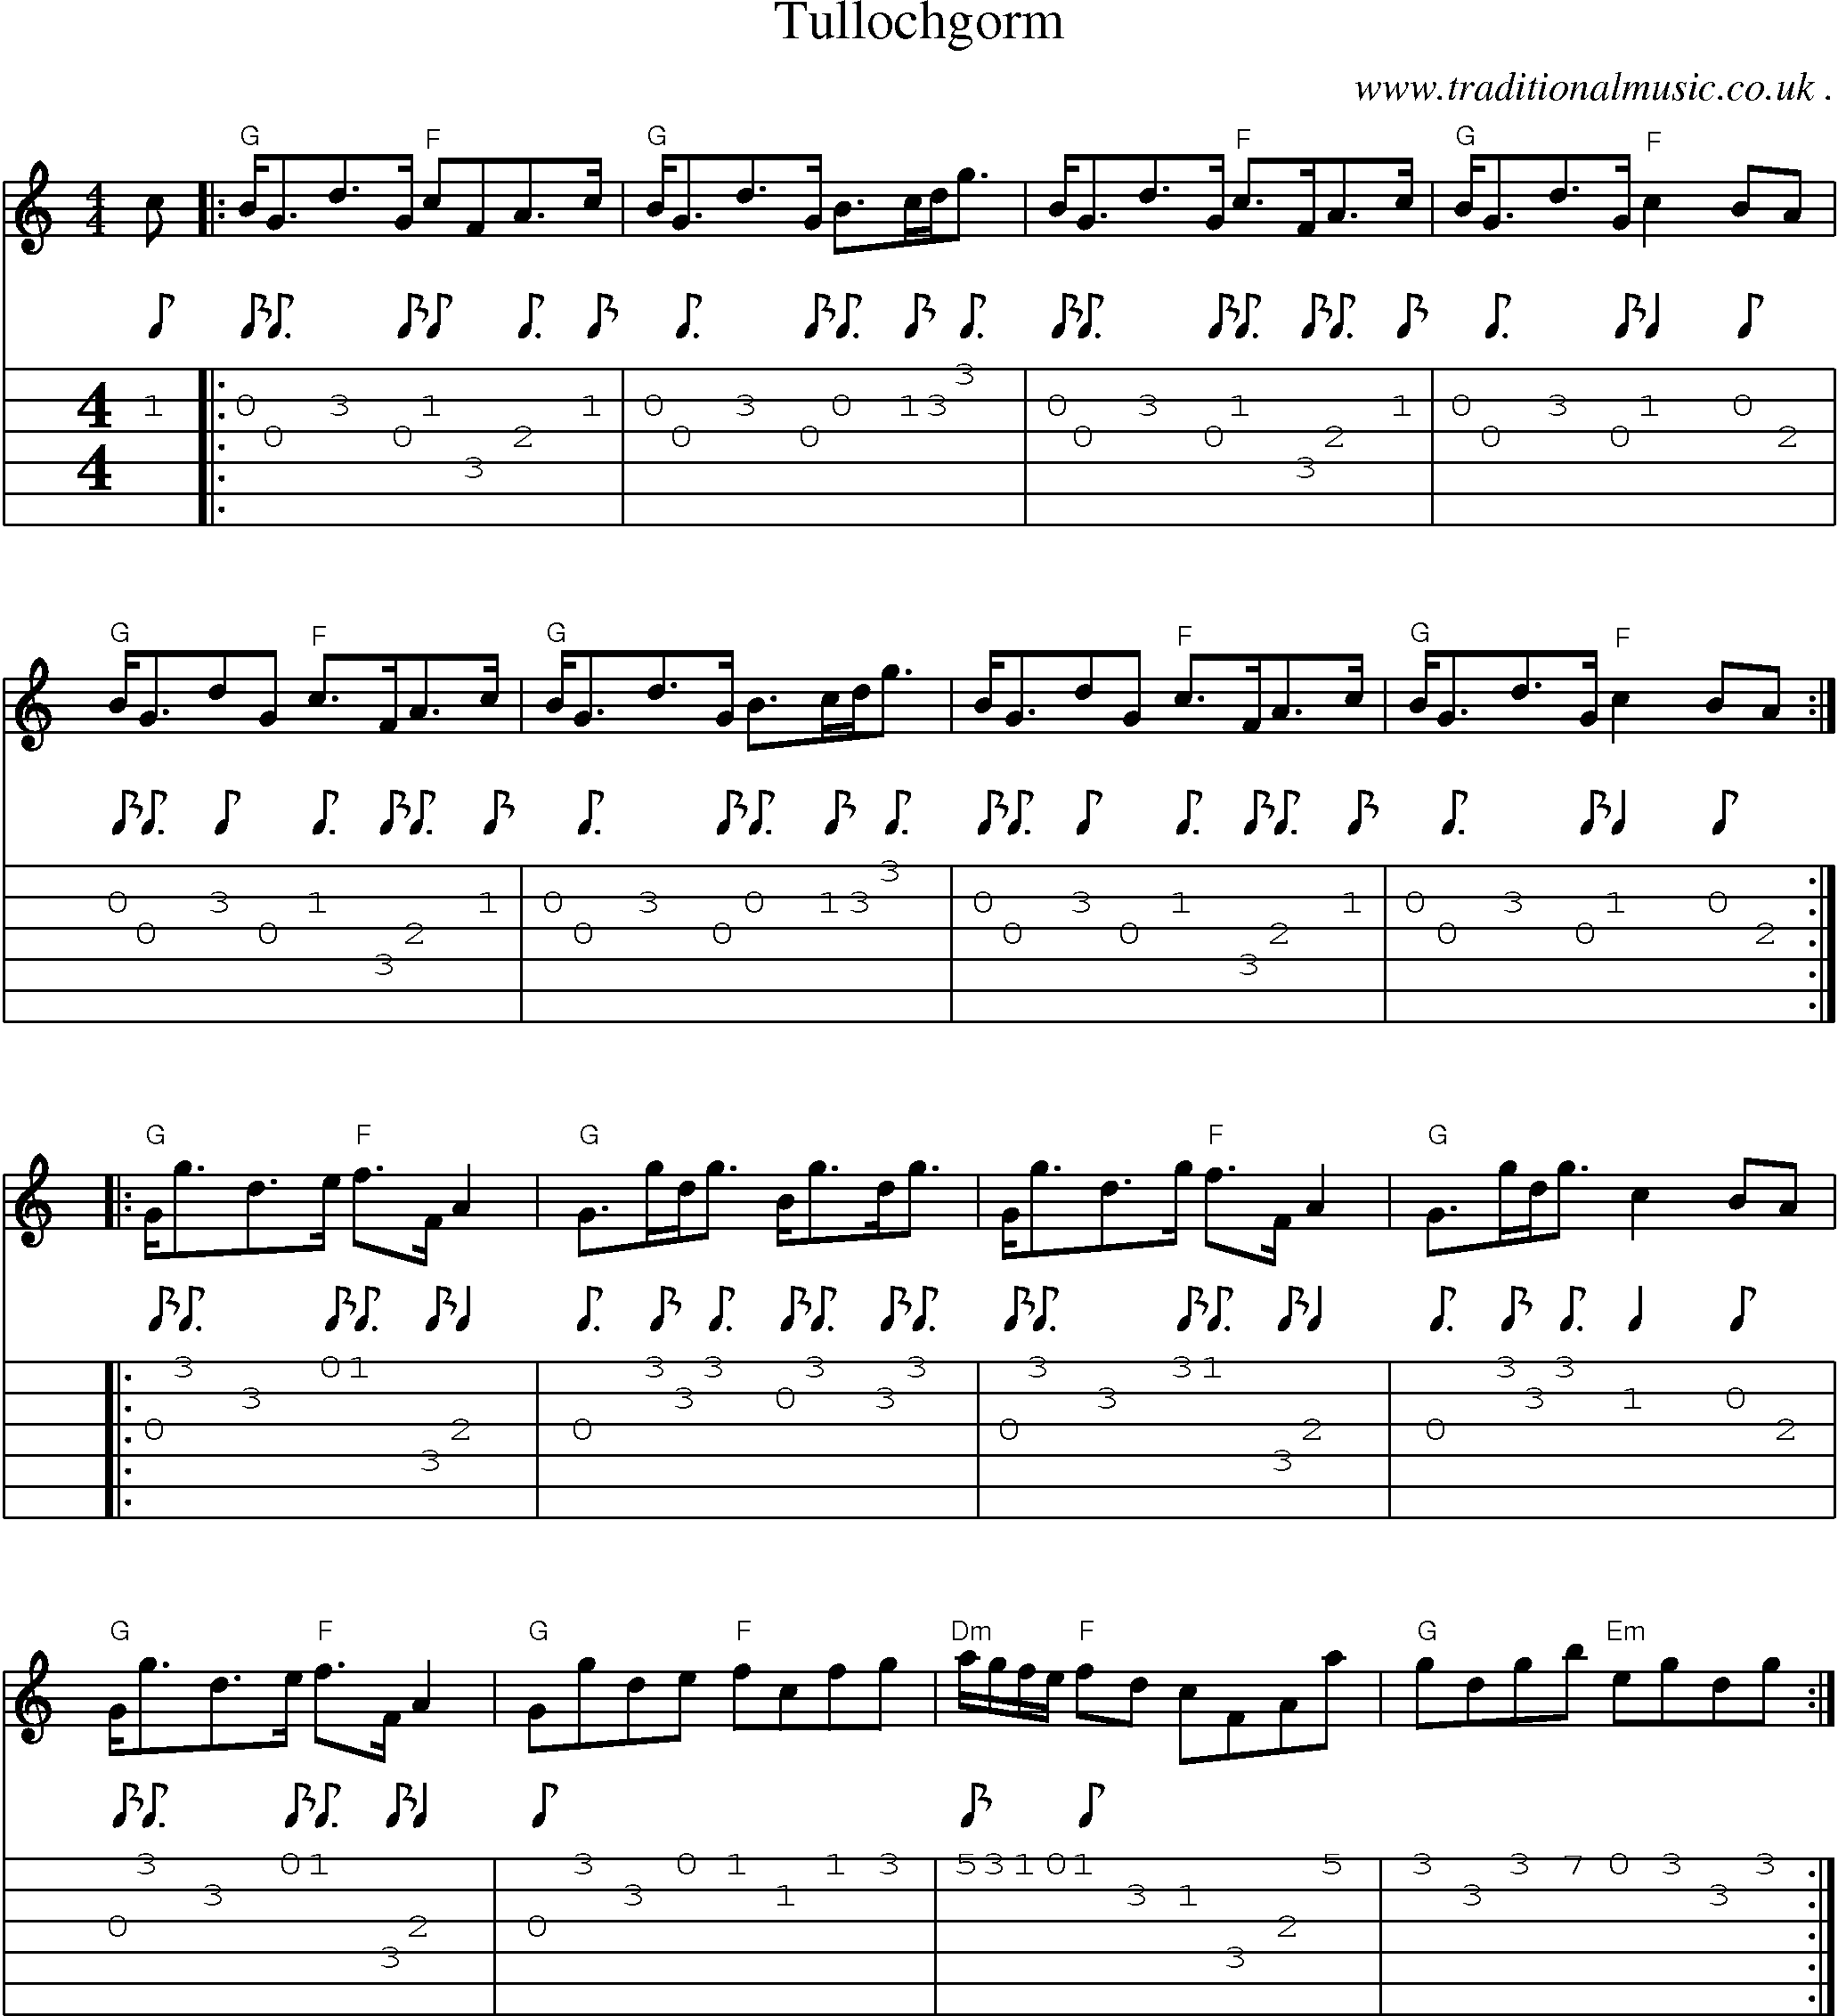 Music Score and Guitar Tabs for Tullochgorm